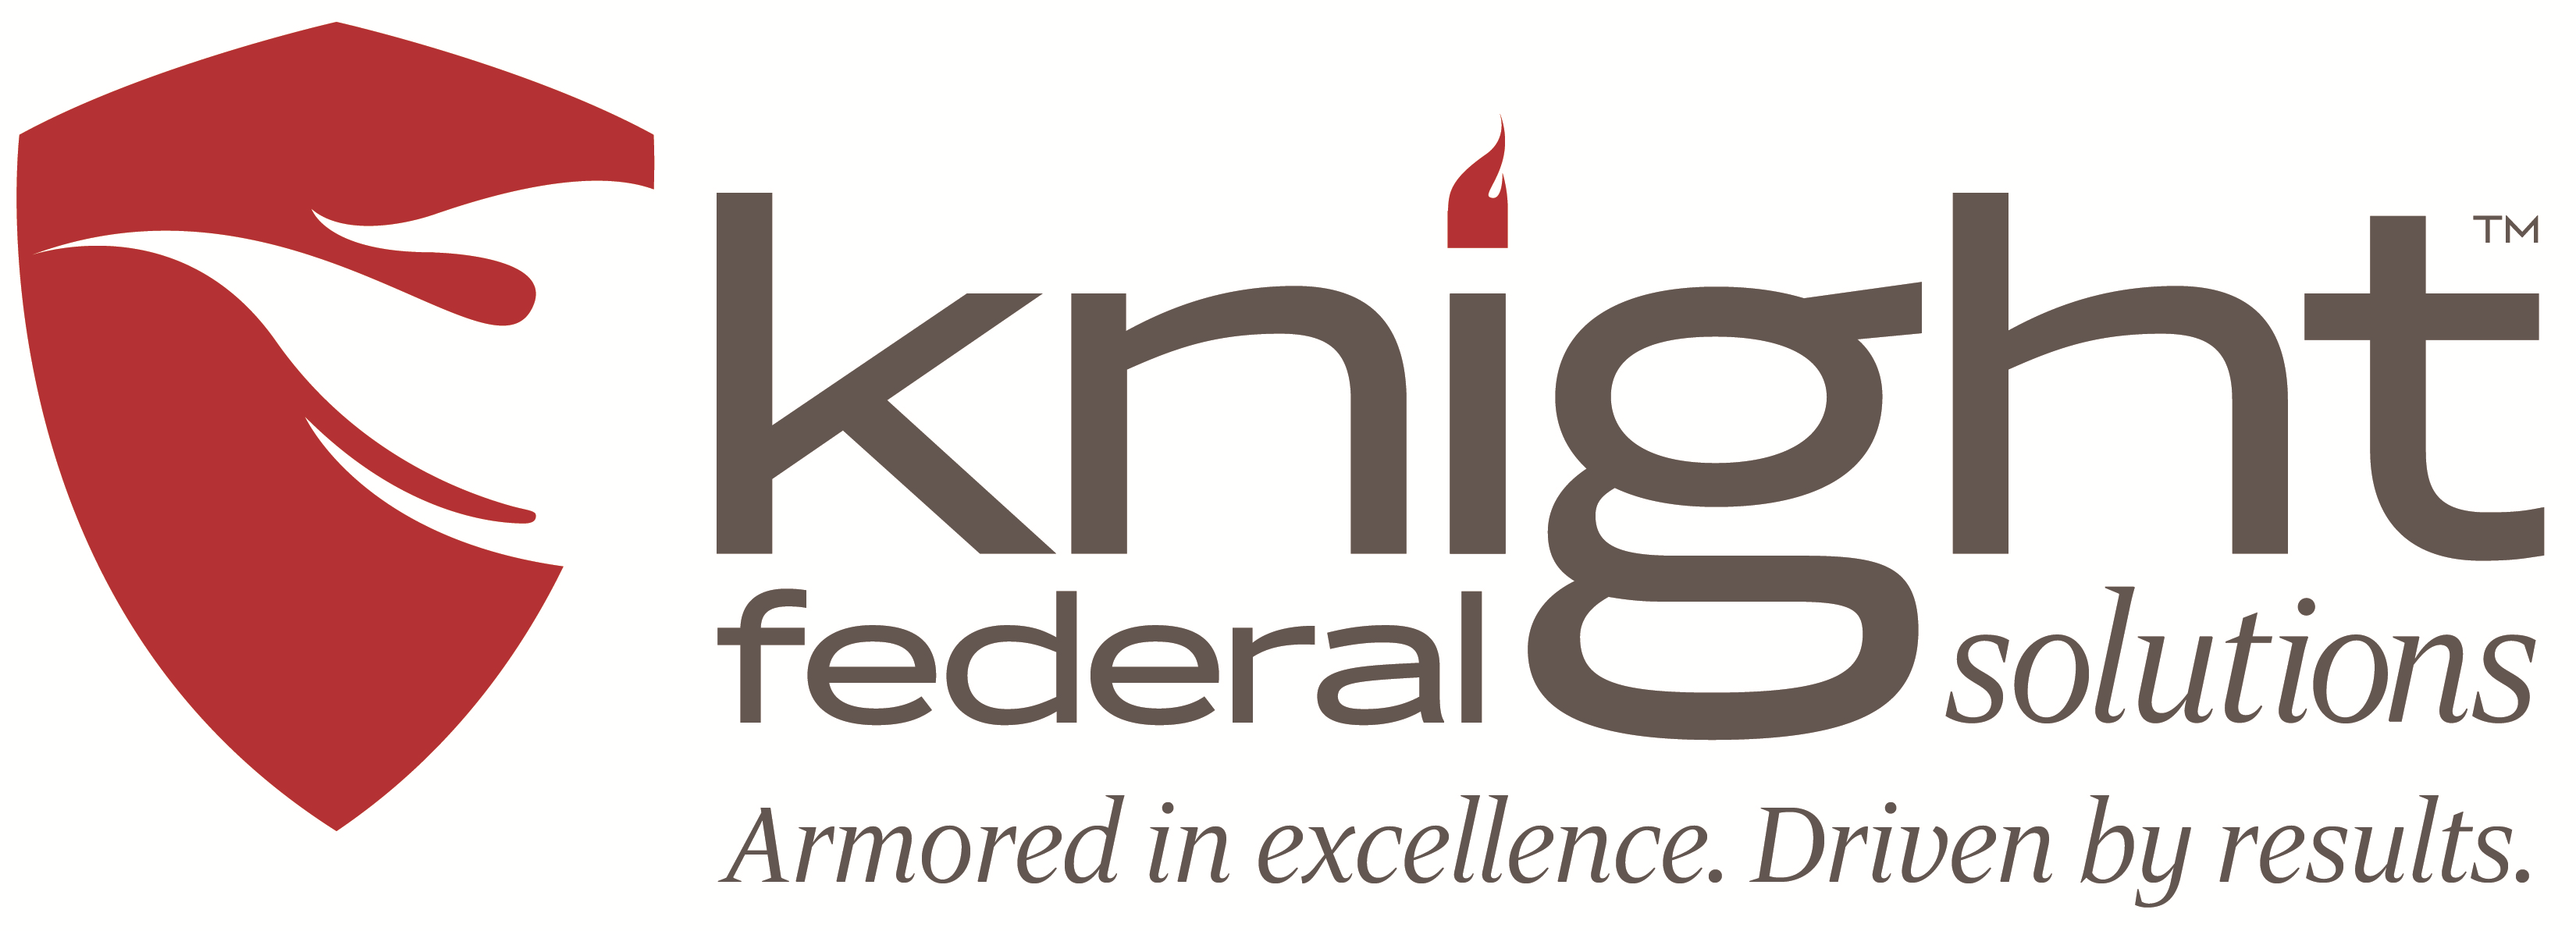 Knight Federal Solutions logo